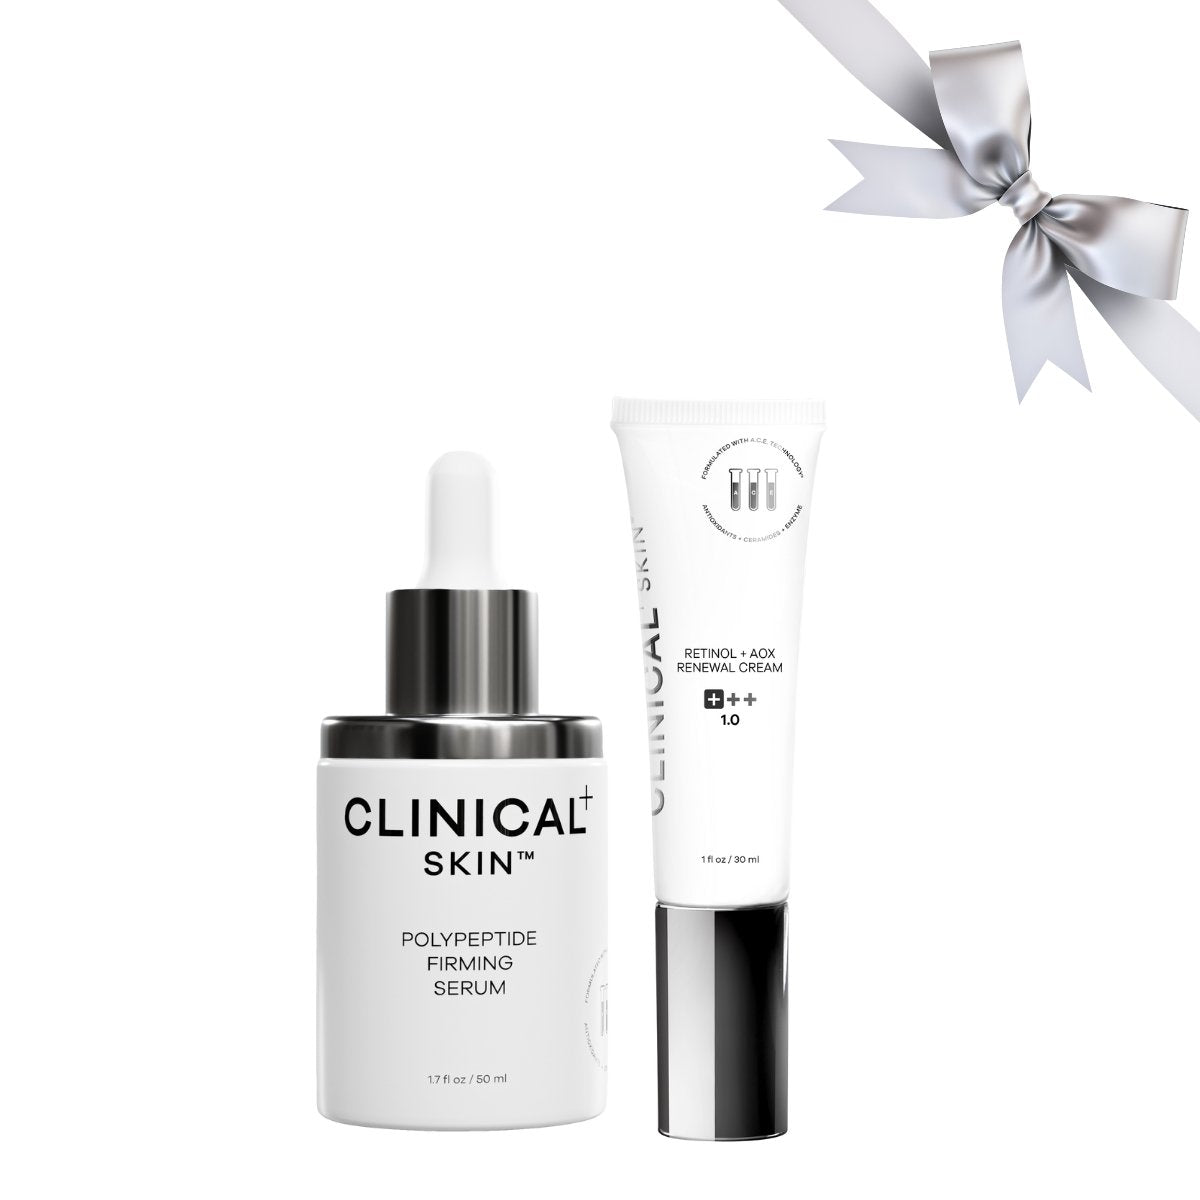 Clinical Skin Advanced Skin Renewal and Firming Duo